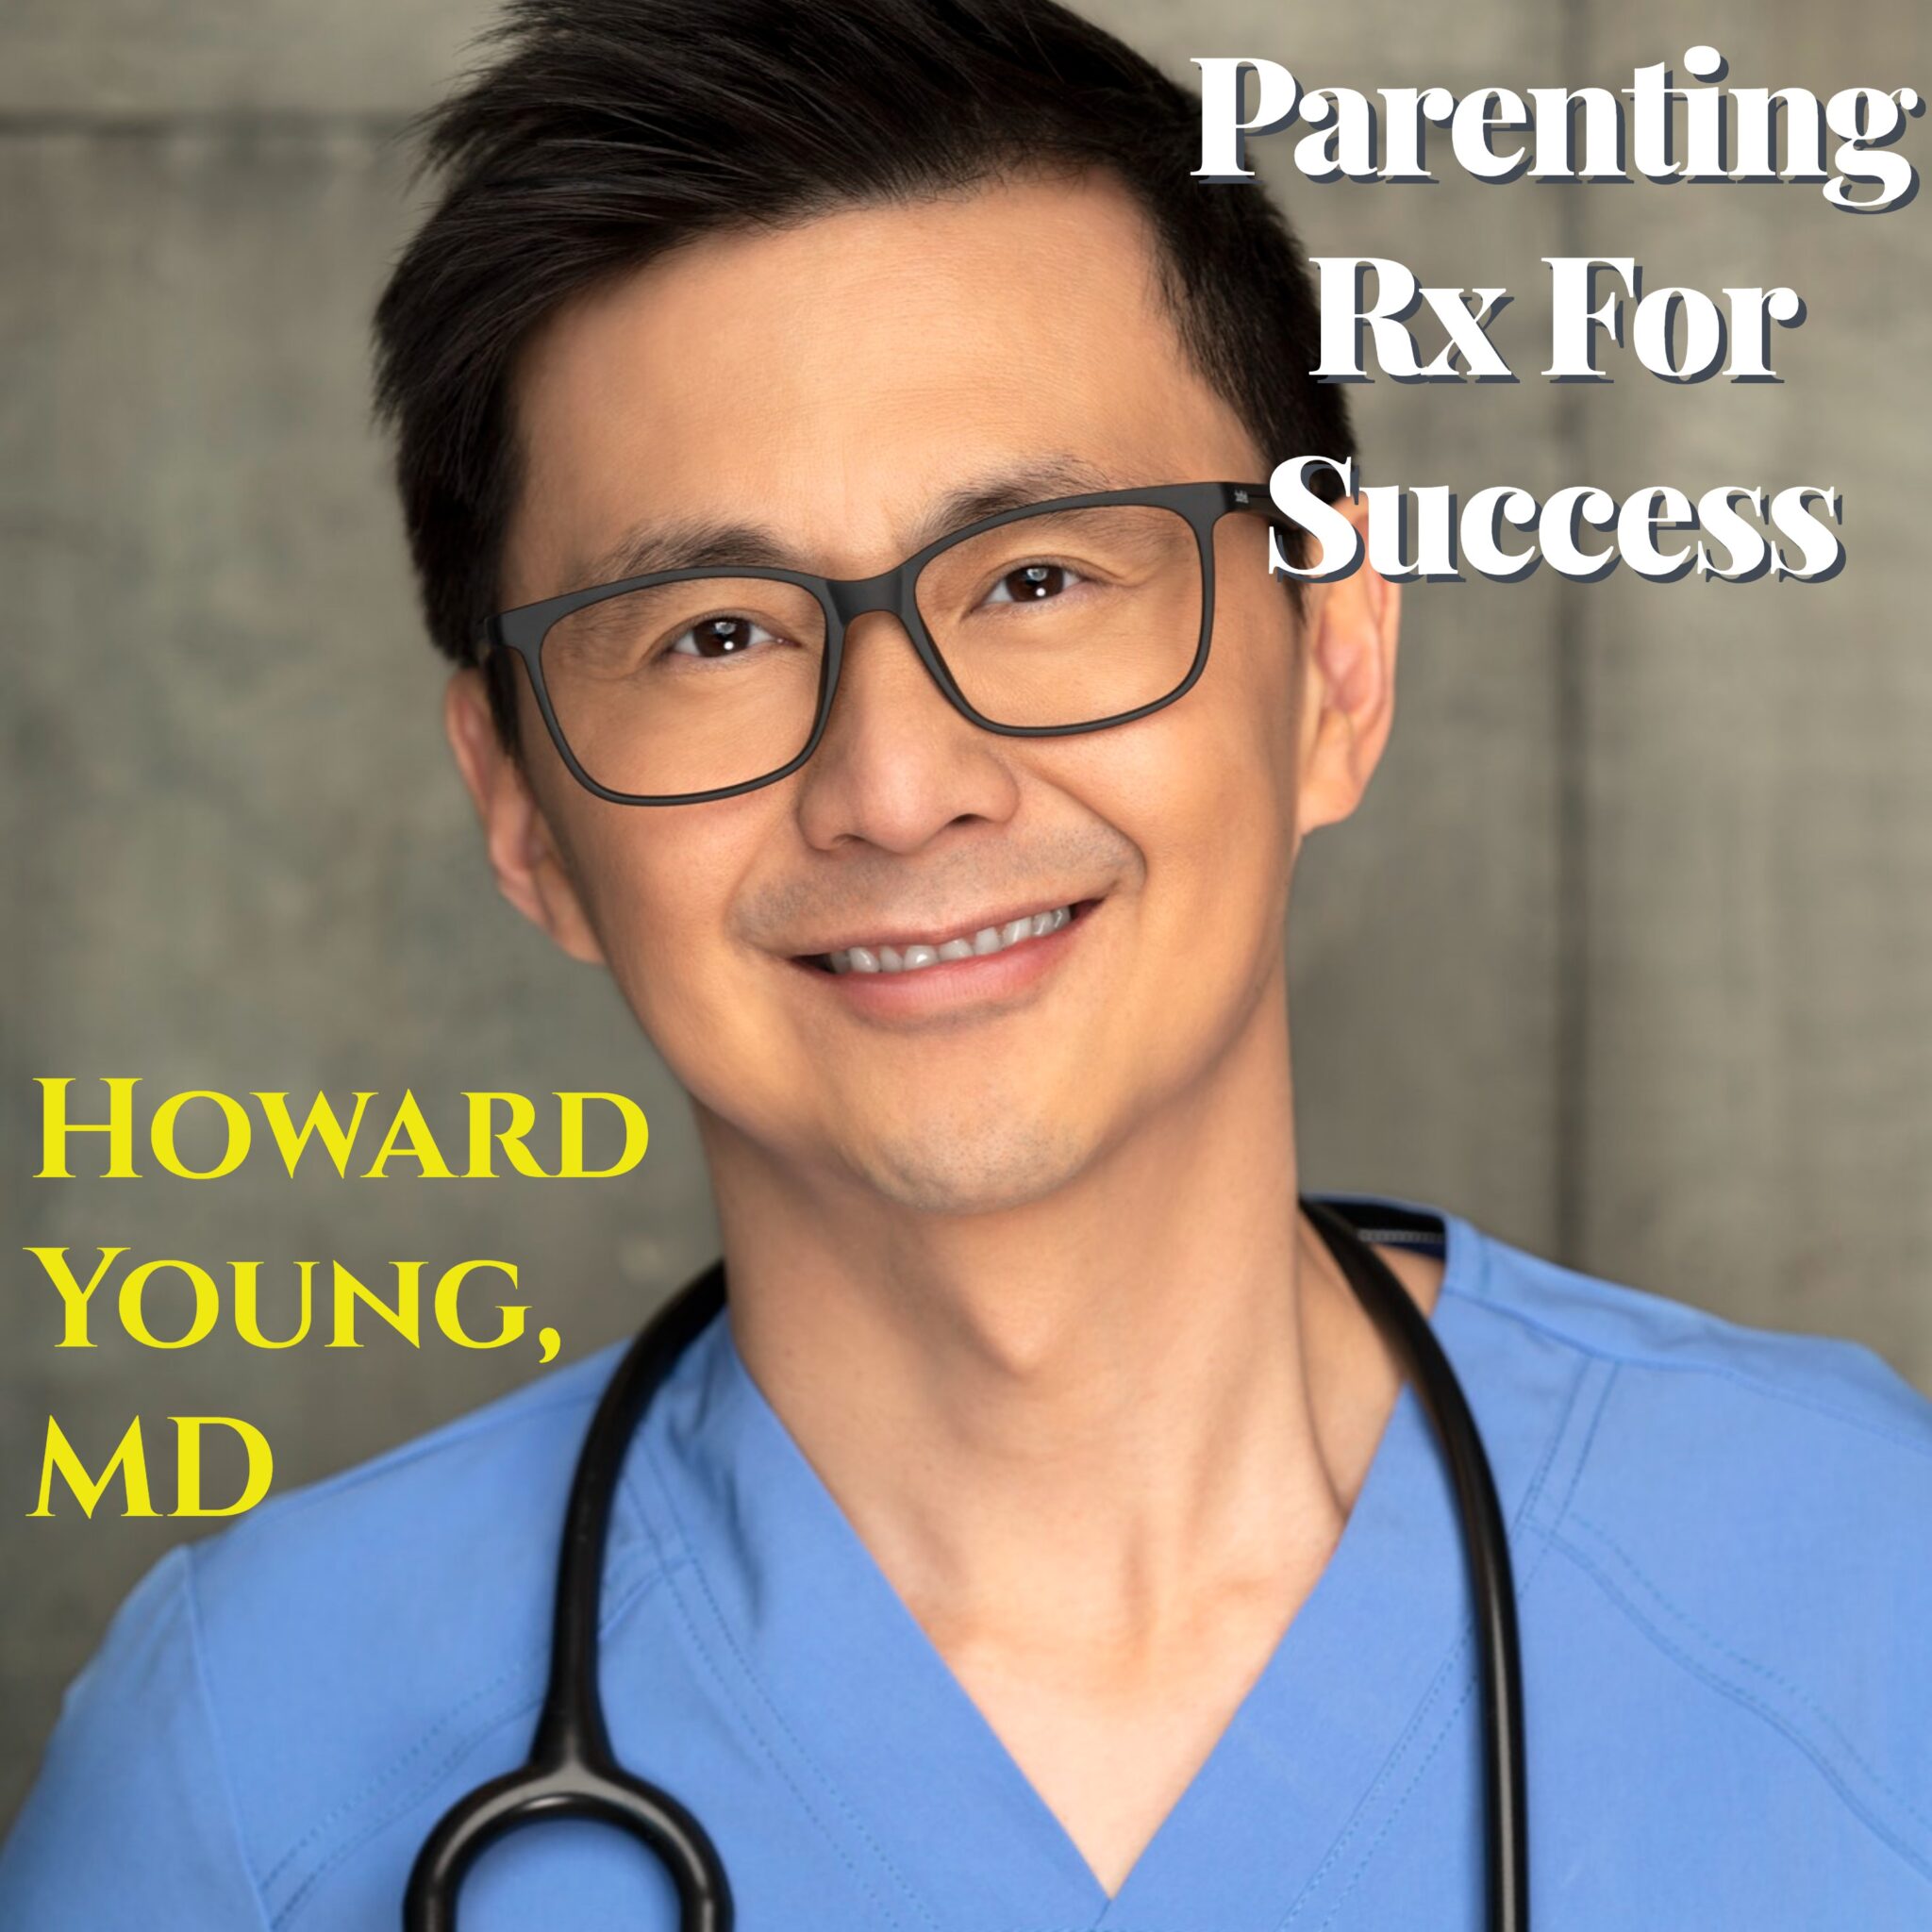 PARENTING, MD: RX FOR SUCCESS